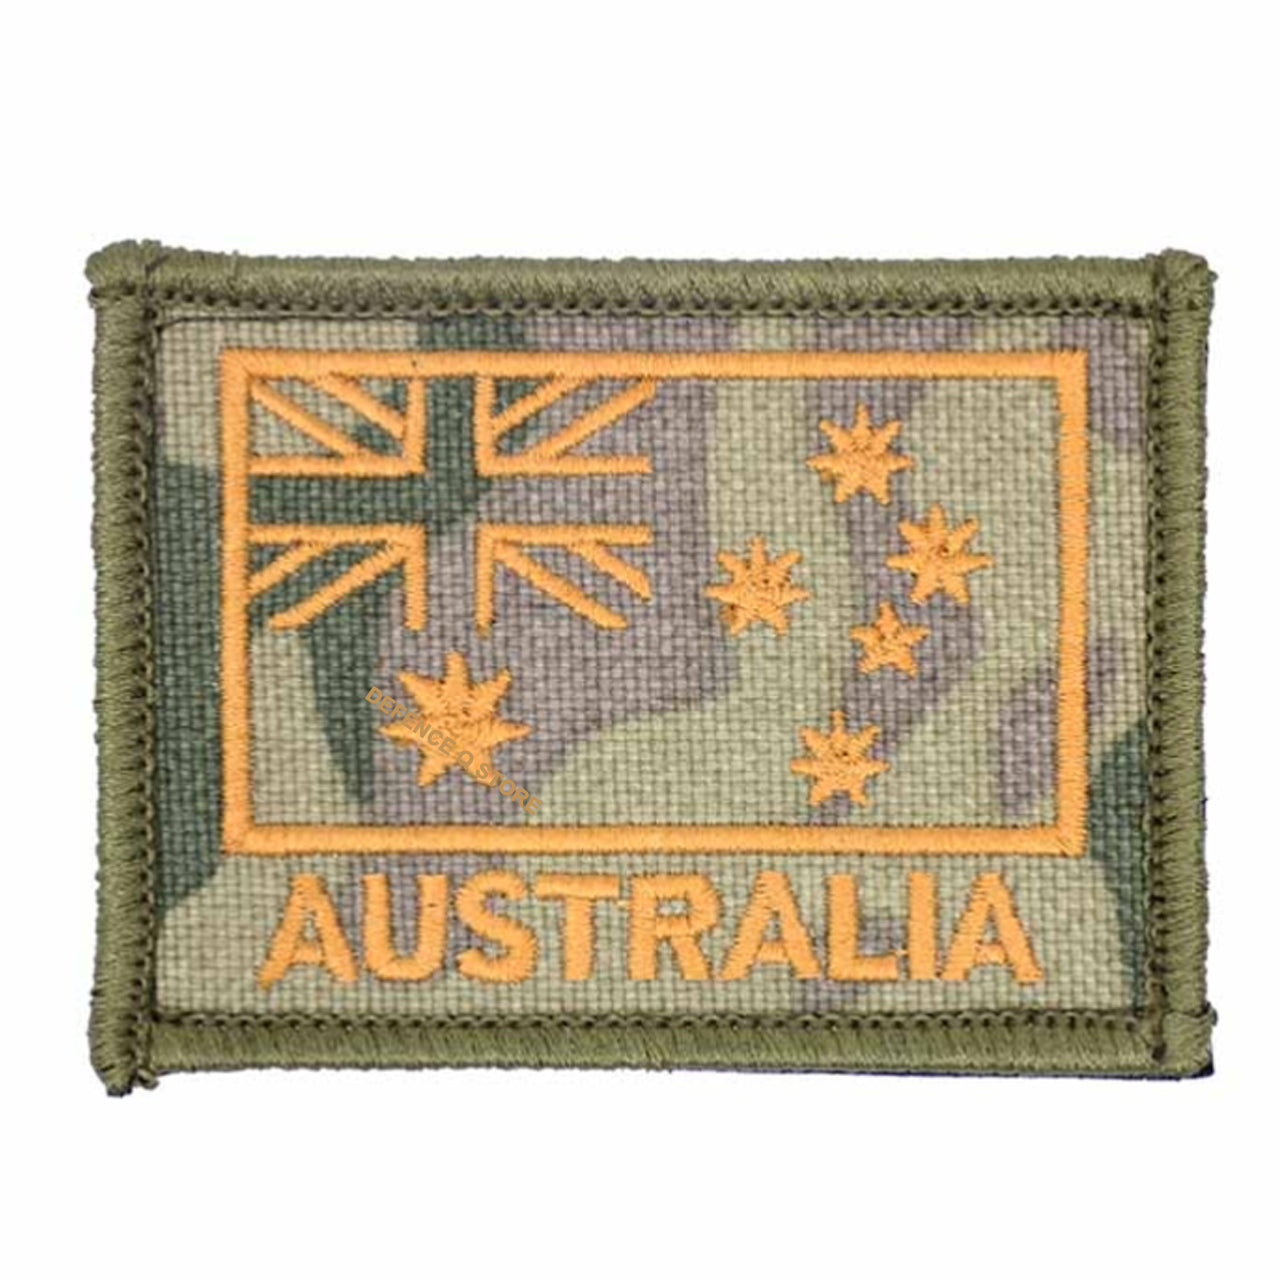 The Australia Flag Subdued Embroidery Velcro Backed Patch Multicam features a woven Australian National flag on a stylish Multicam background, complete with the inspiring word "AUSTRALIA" underneath. Measuring 75 x 55mm, this patch is the perfect way to show your love for Australia in a subtle yet powerful way. www.defenceqstore.com.au